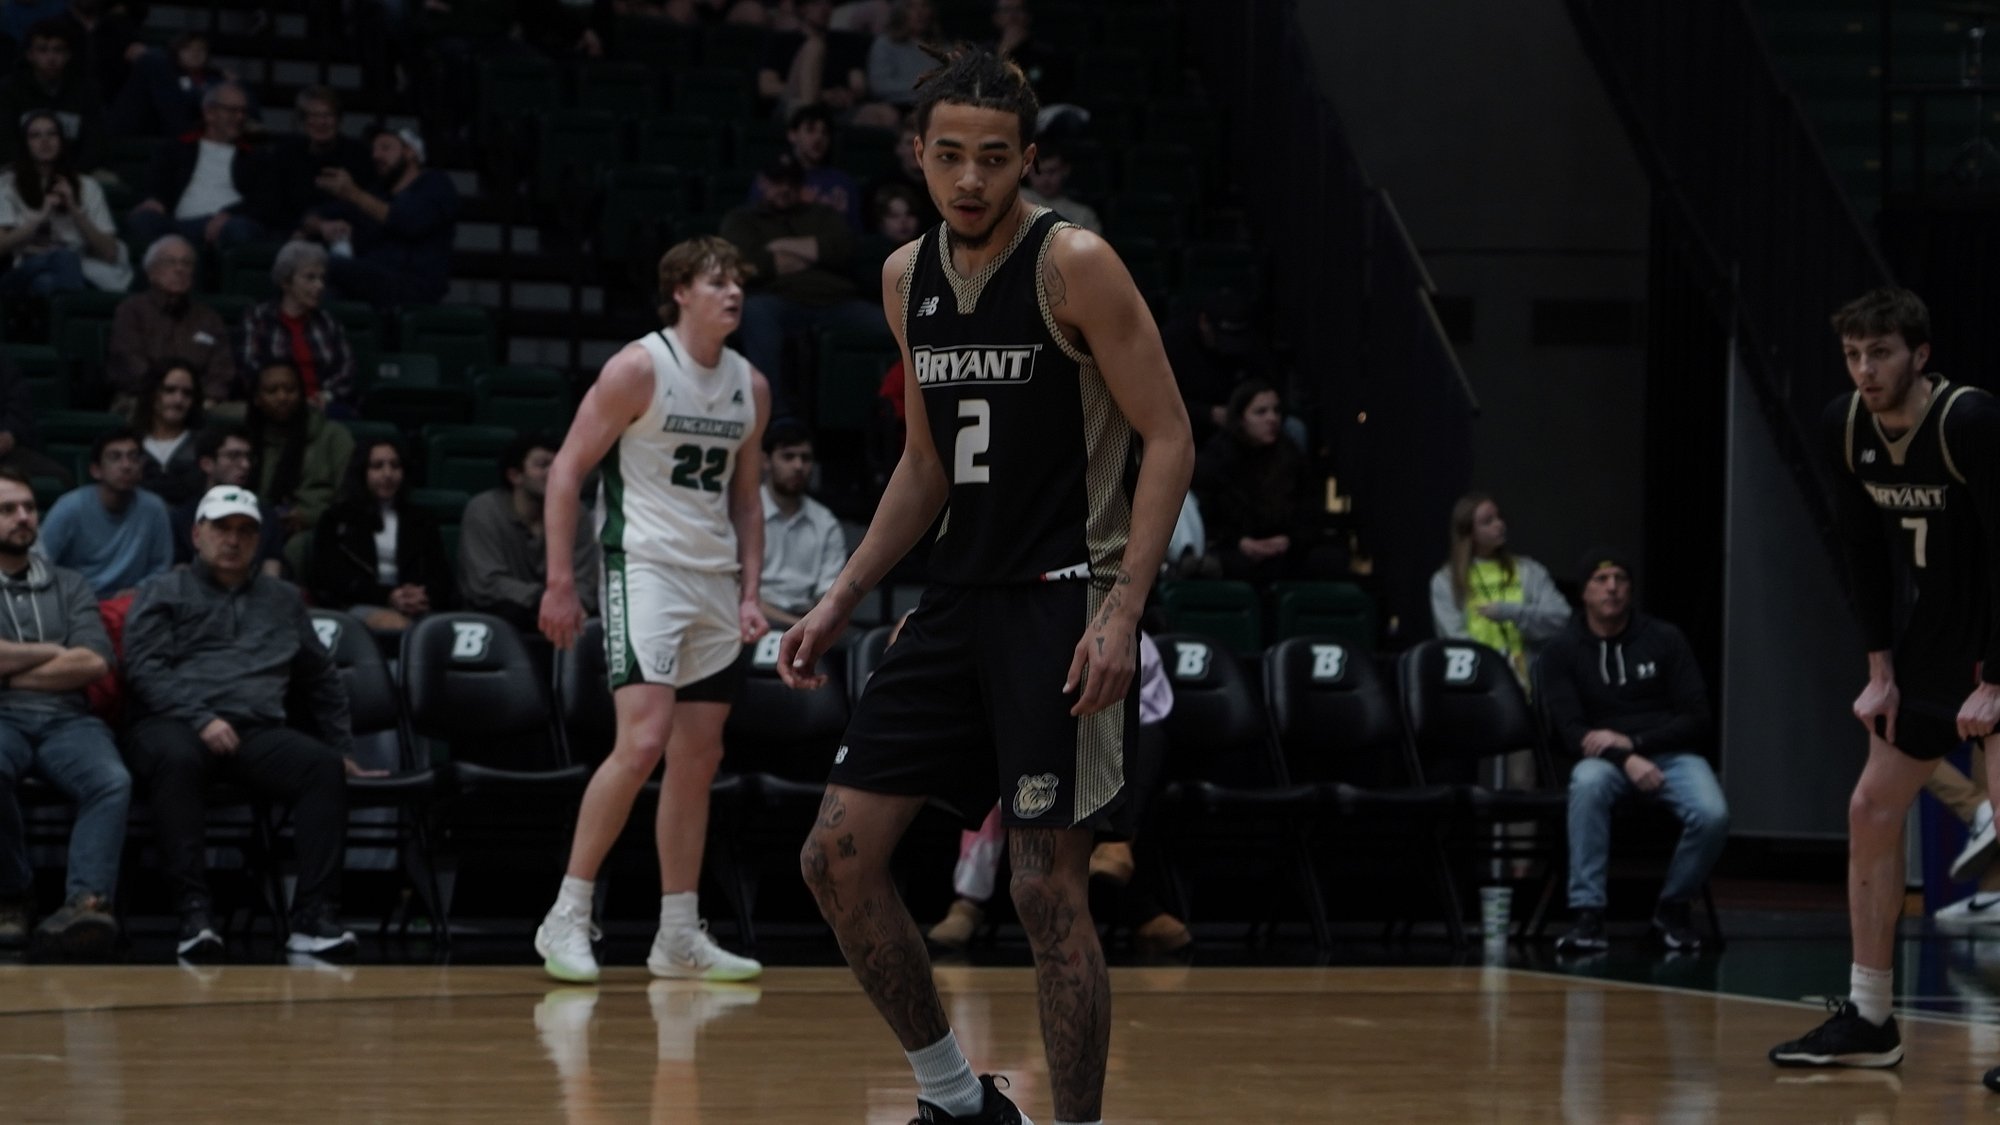 Bryant earns hard-fought victory, 70-69, at Binghamton